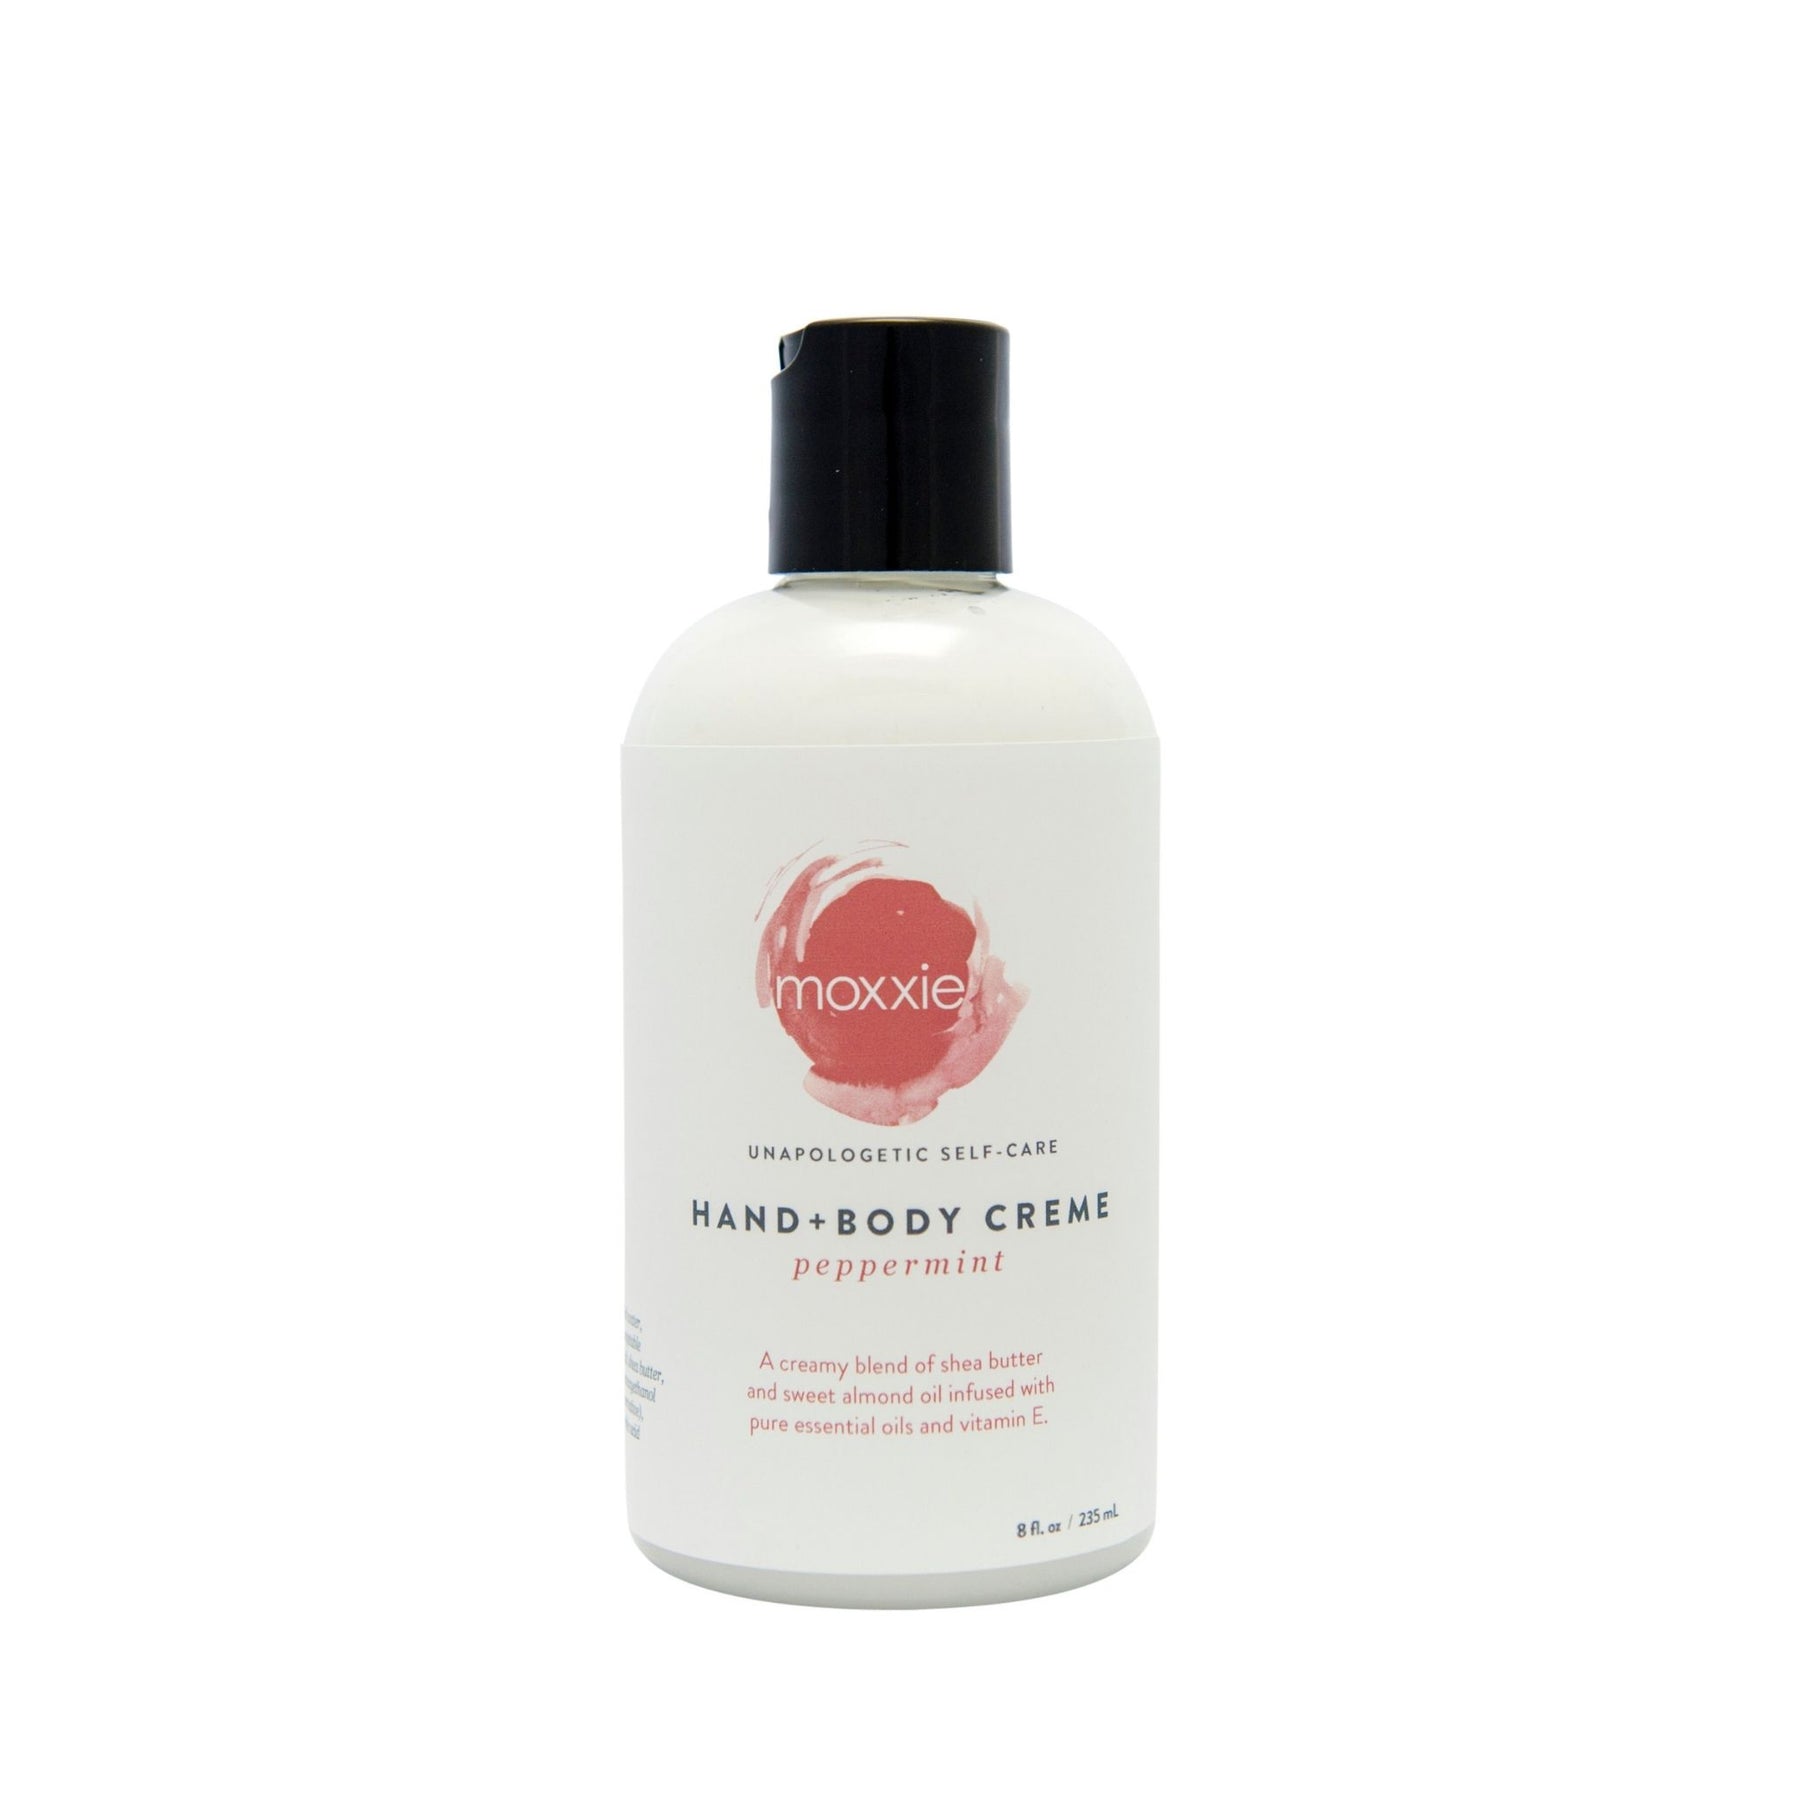 Bottle of Moxxie's super-rich hand & body creme lotion.  It is a nourishing blend of whipped shea butter, avocado oil, pure essential oils and vitamin e. 